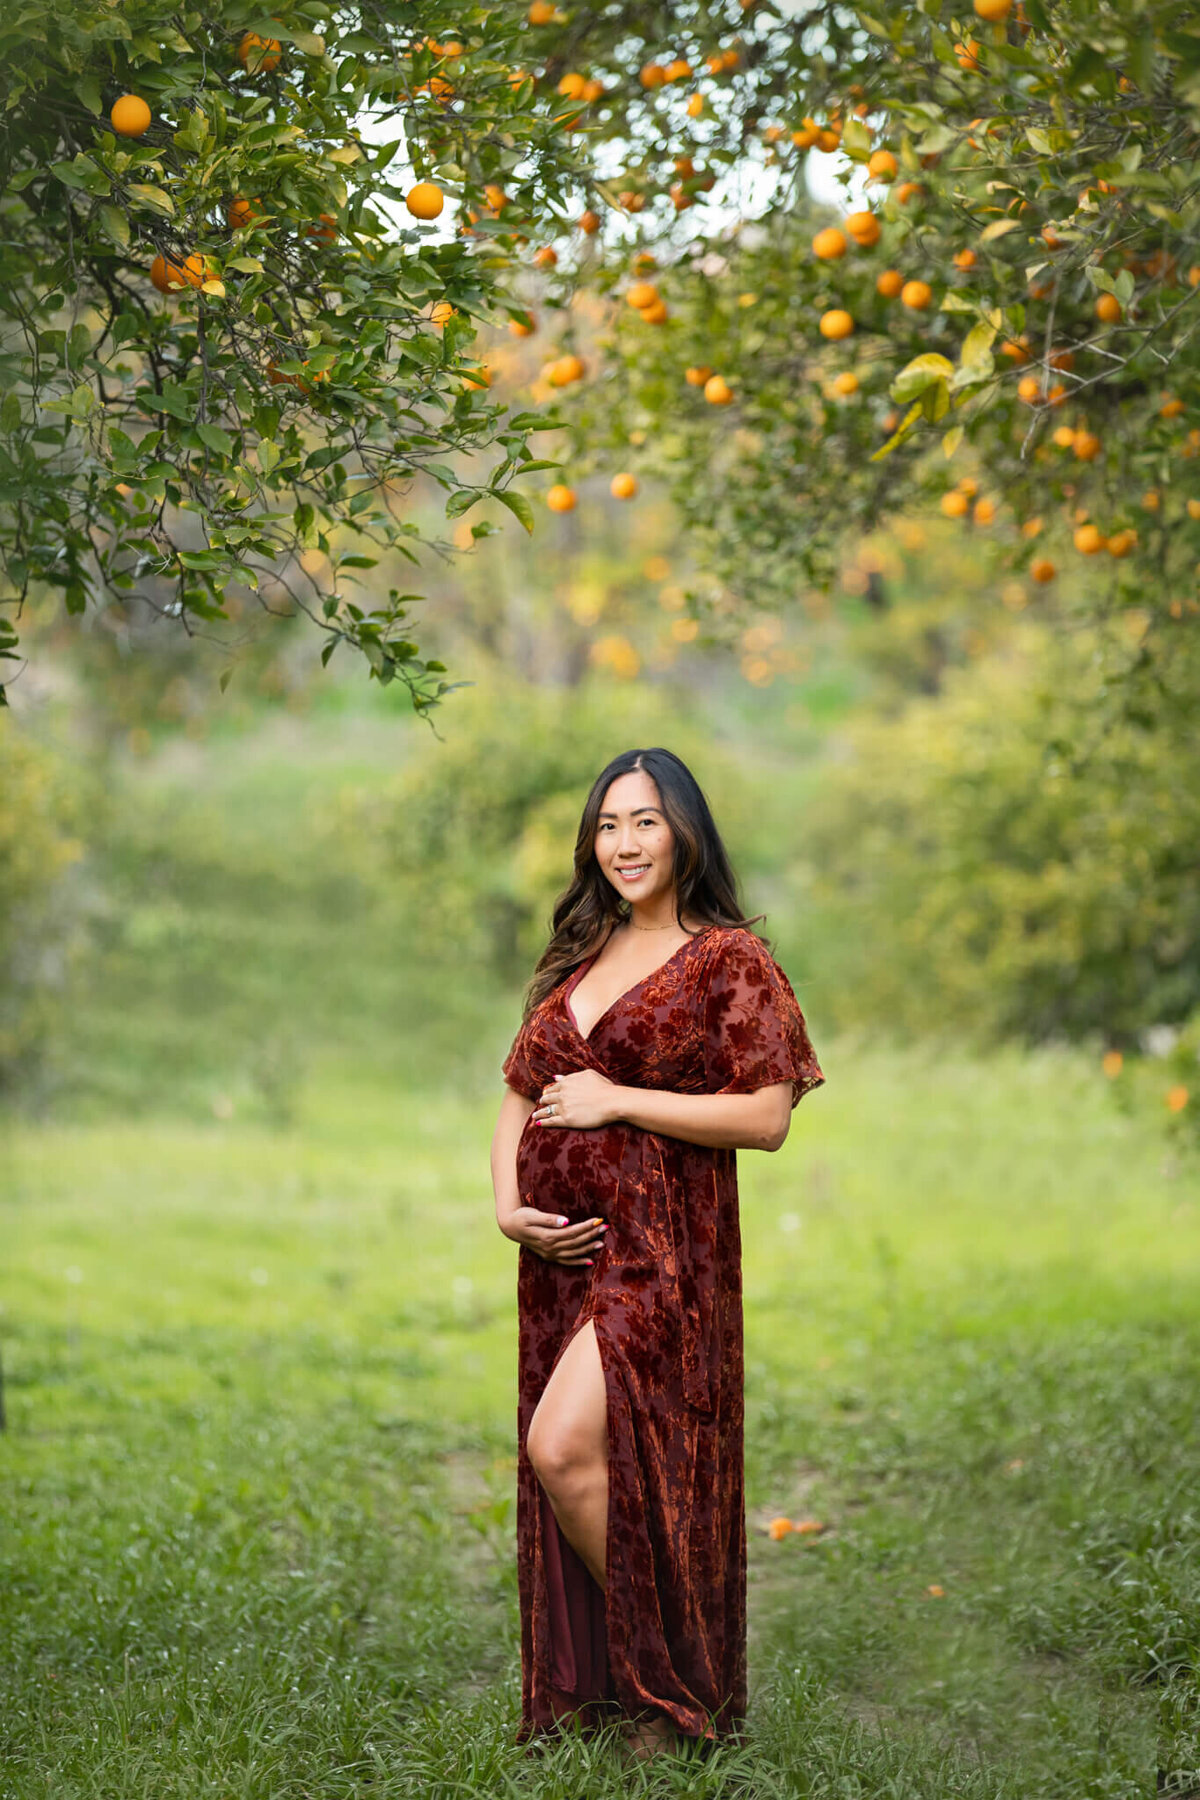 New mom in a red dress photographed under the orange tress in Los Angeles